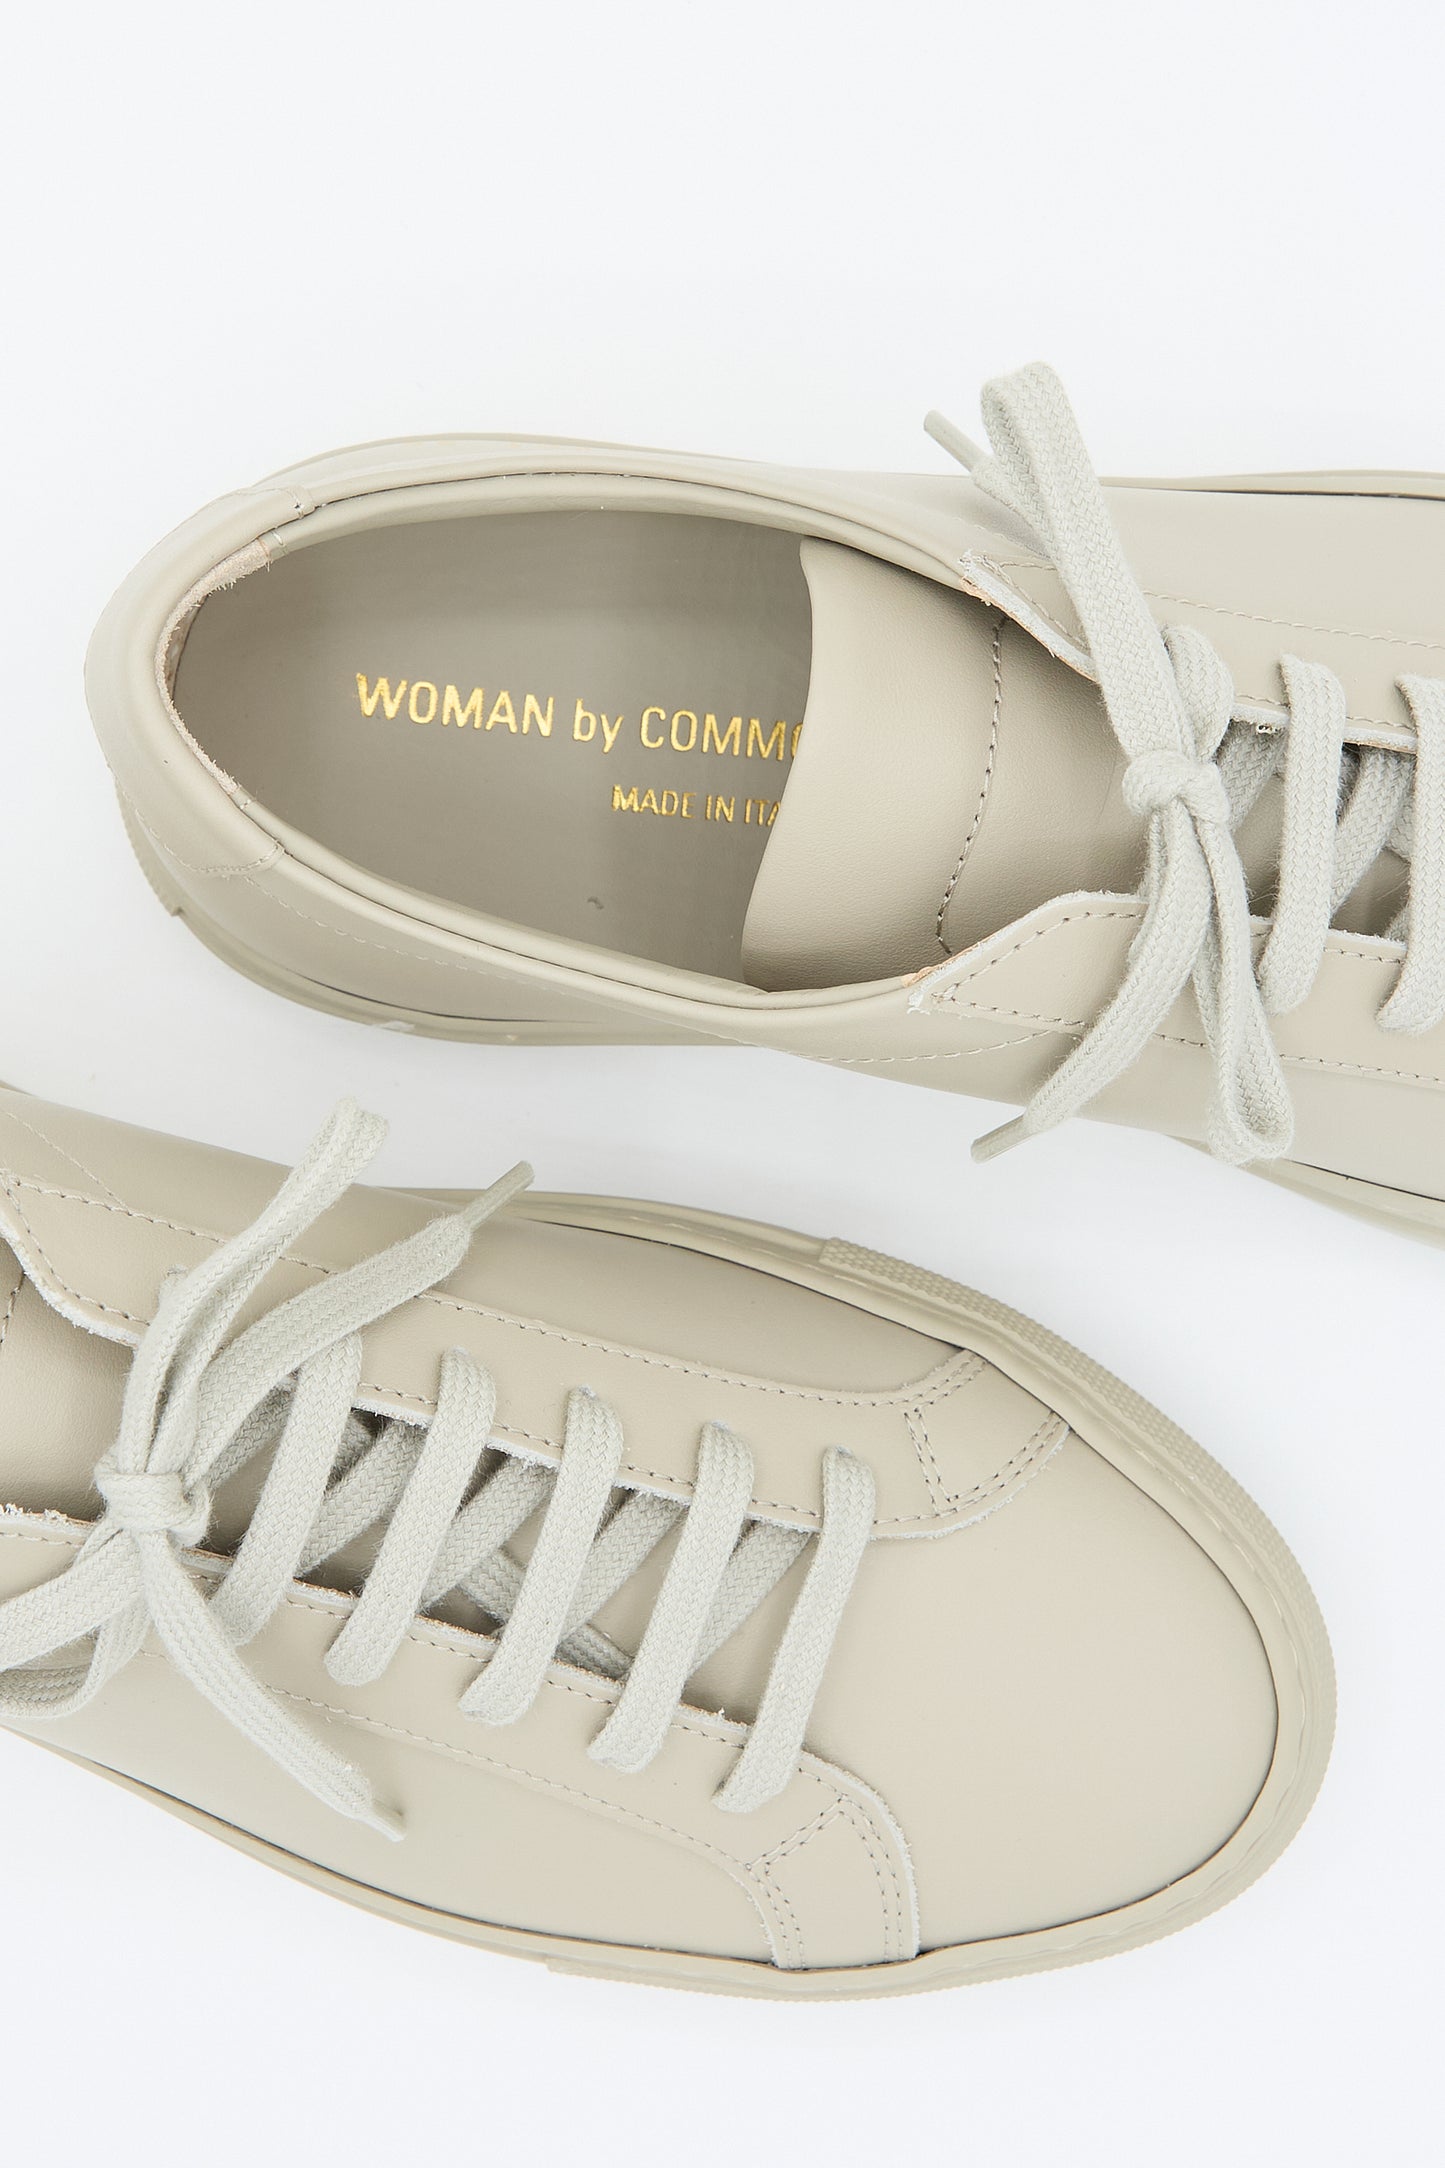 A pair of beige, minimalist Original Achilles Low 3701 sneakers with gray laces from Common Projects, isolated on a white background. Made in Italy.